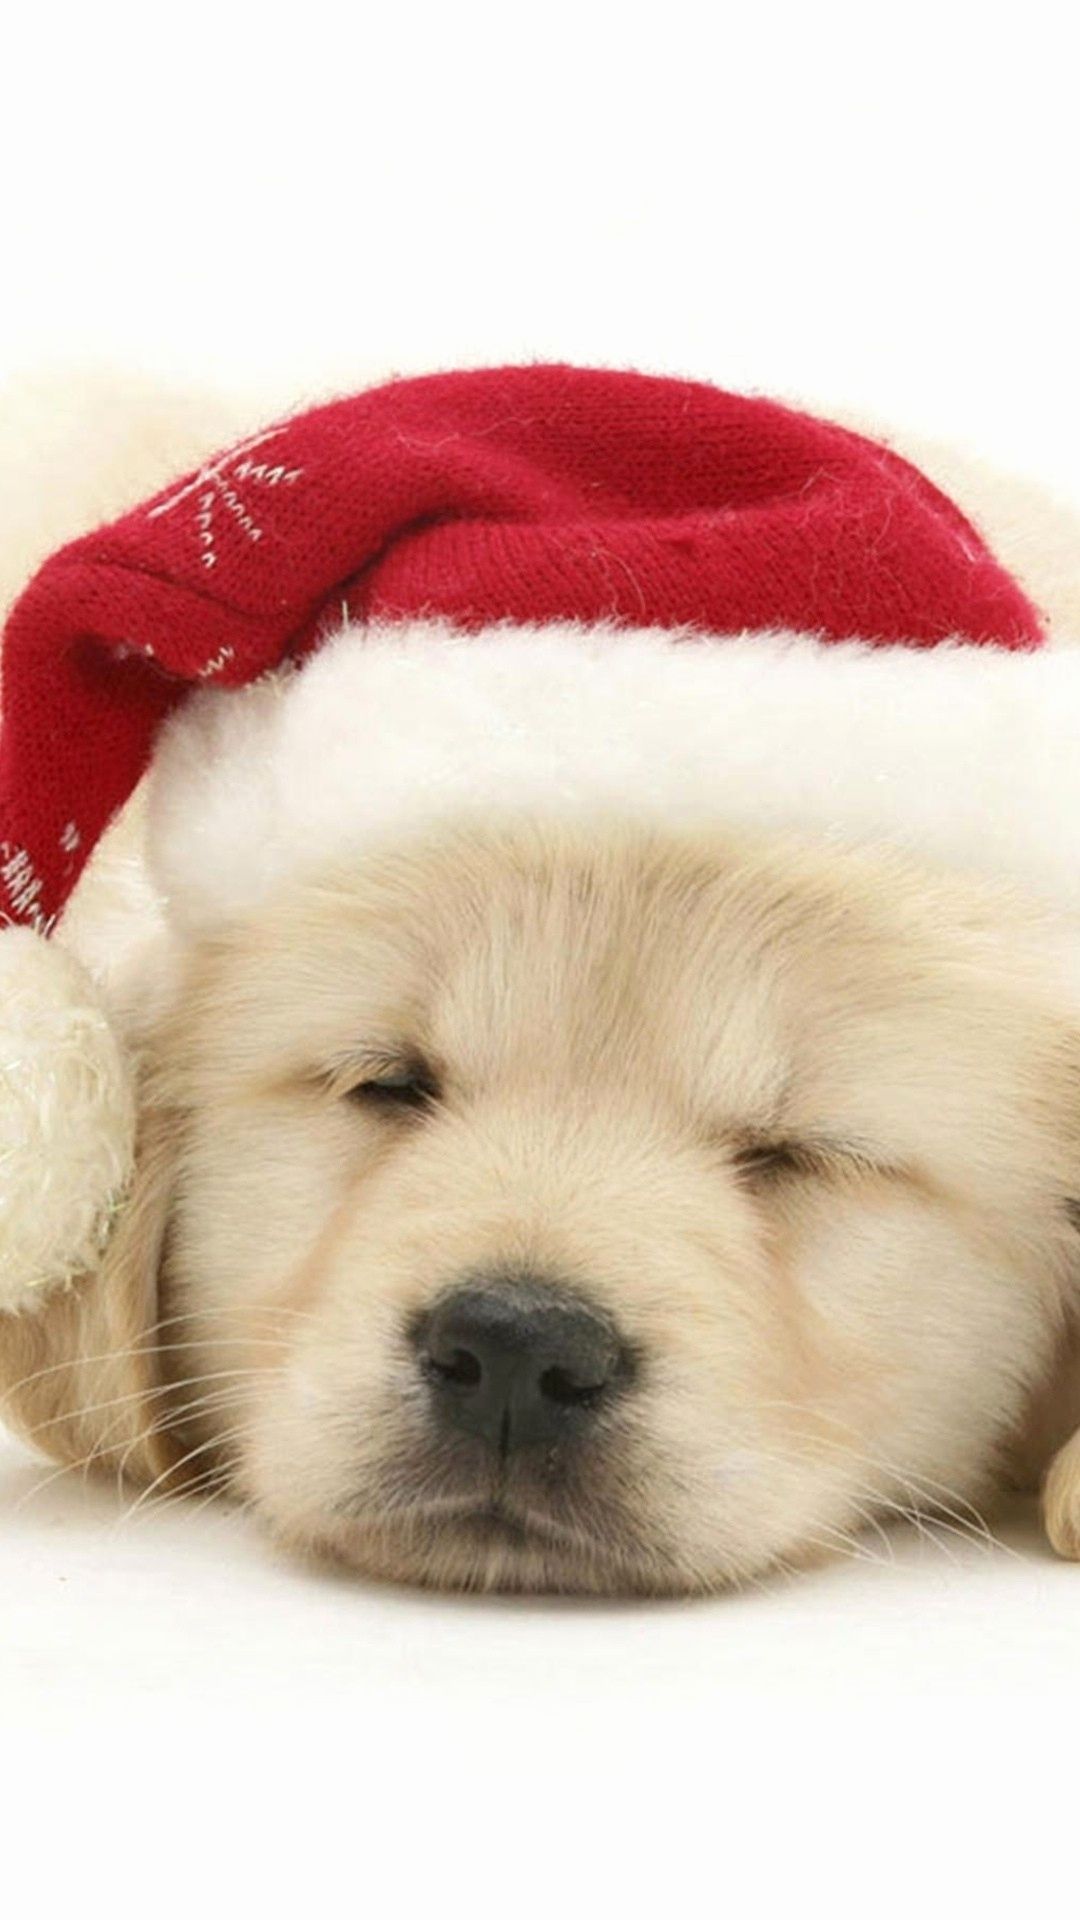 Christmas Puppy Wallpaper Best Of Cute Christmas Puppies and Dogs This Month of The Hudson